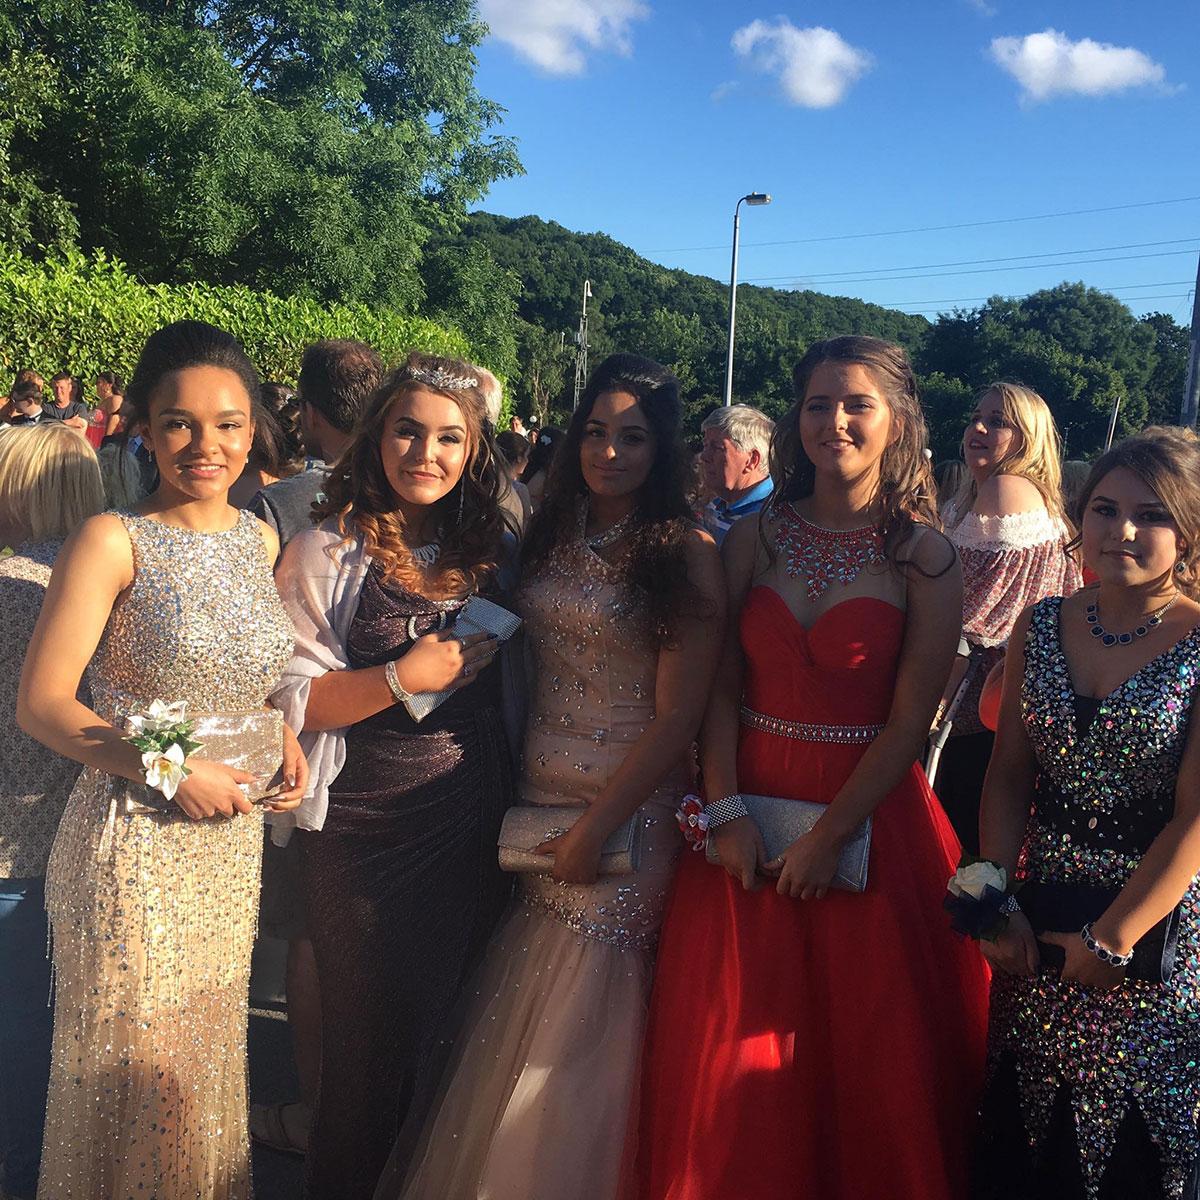 Lliswerry: A group of friends at the prom.